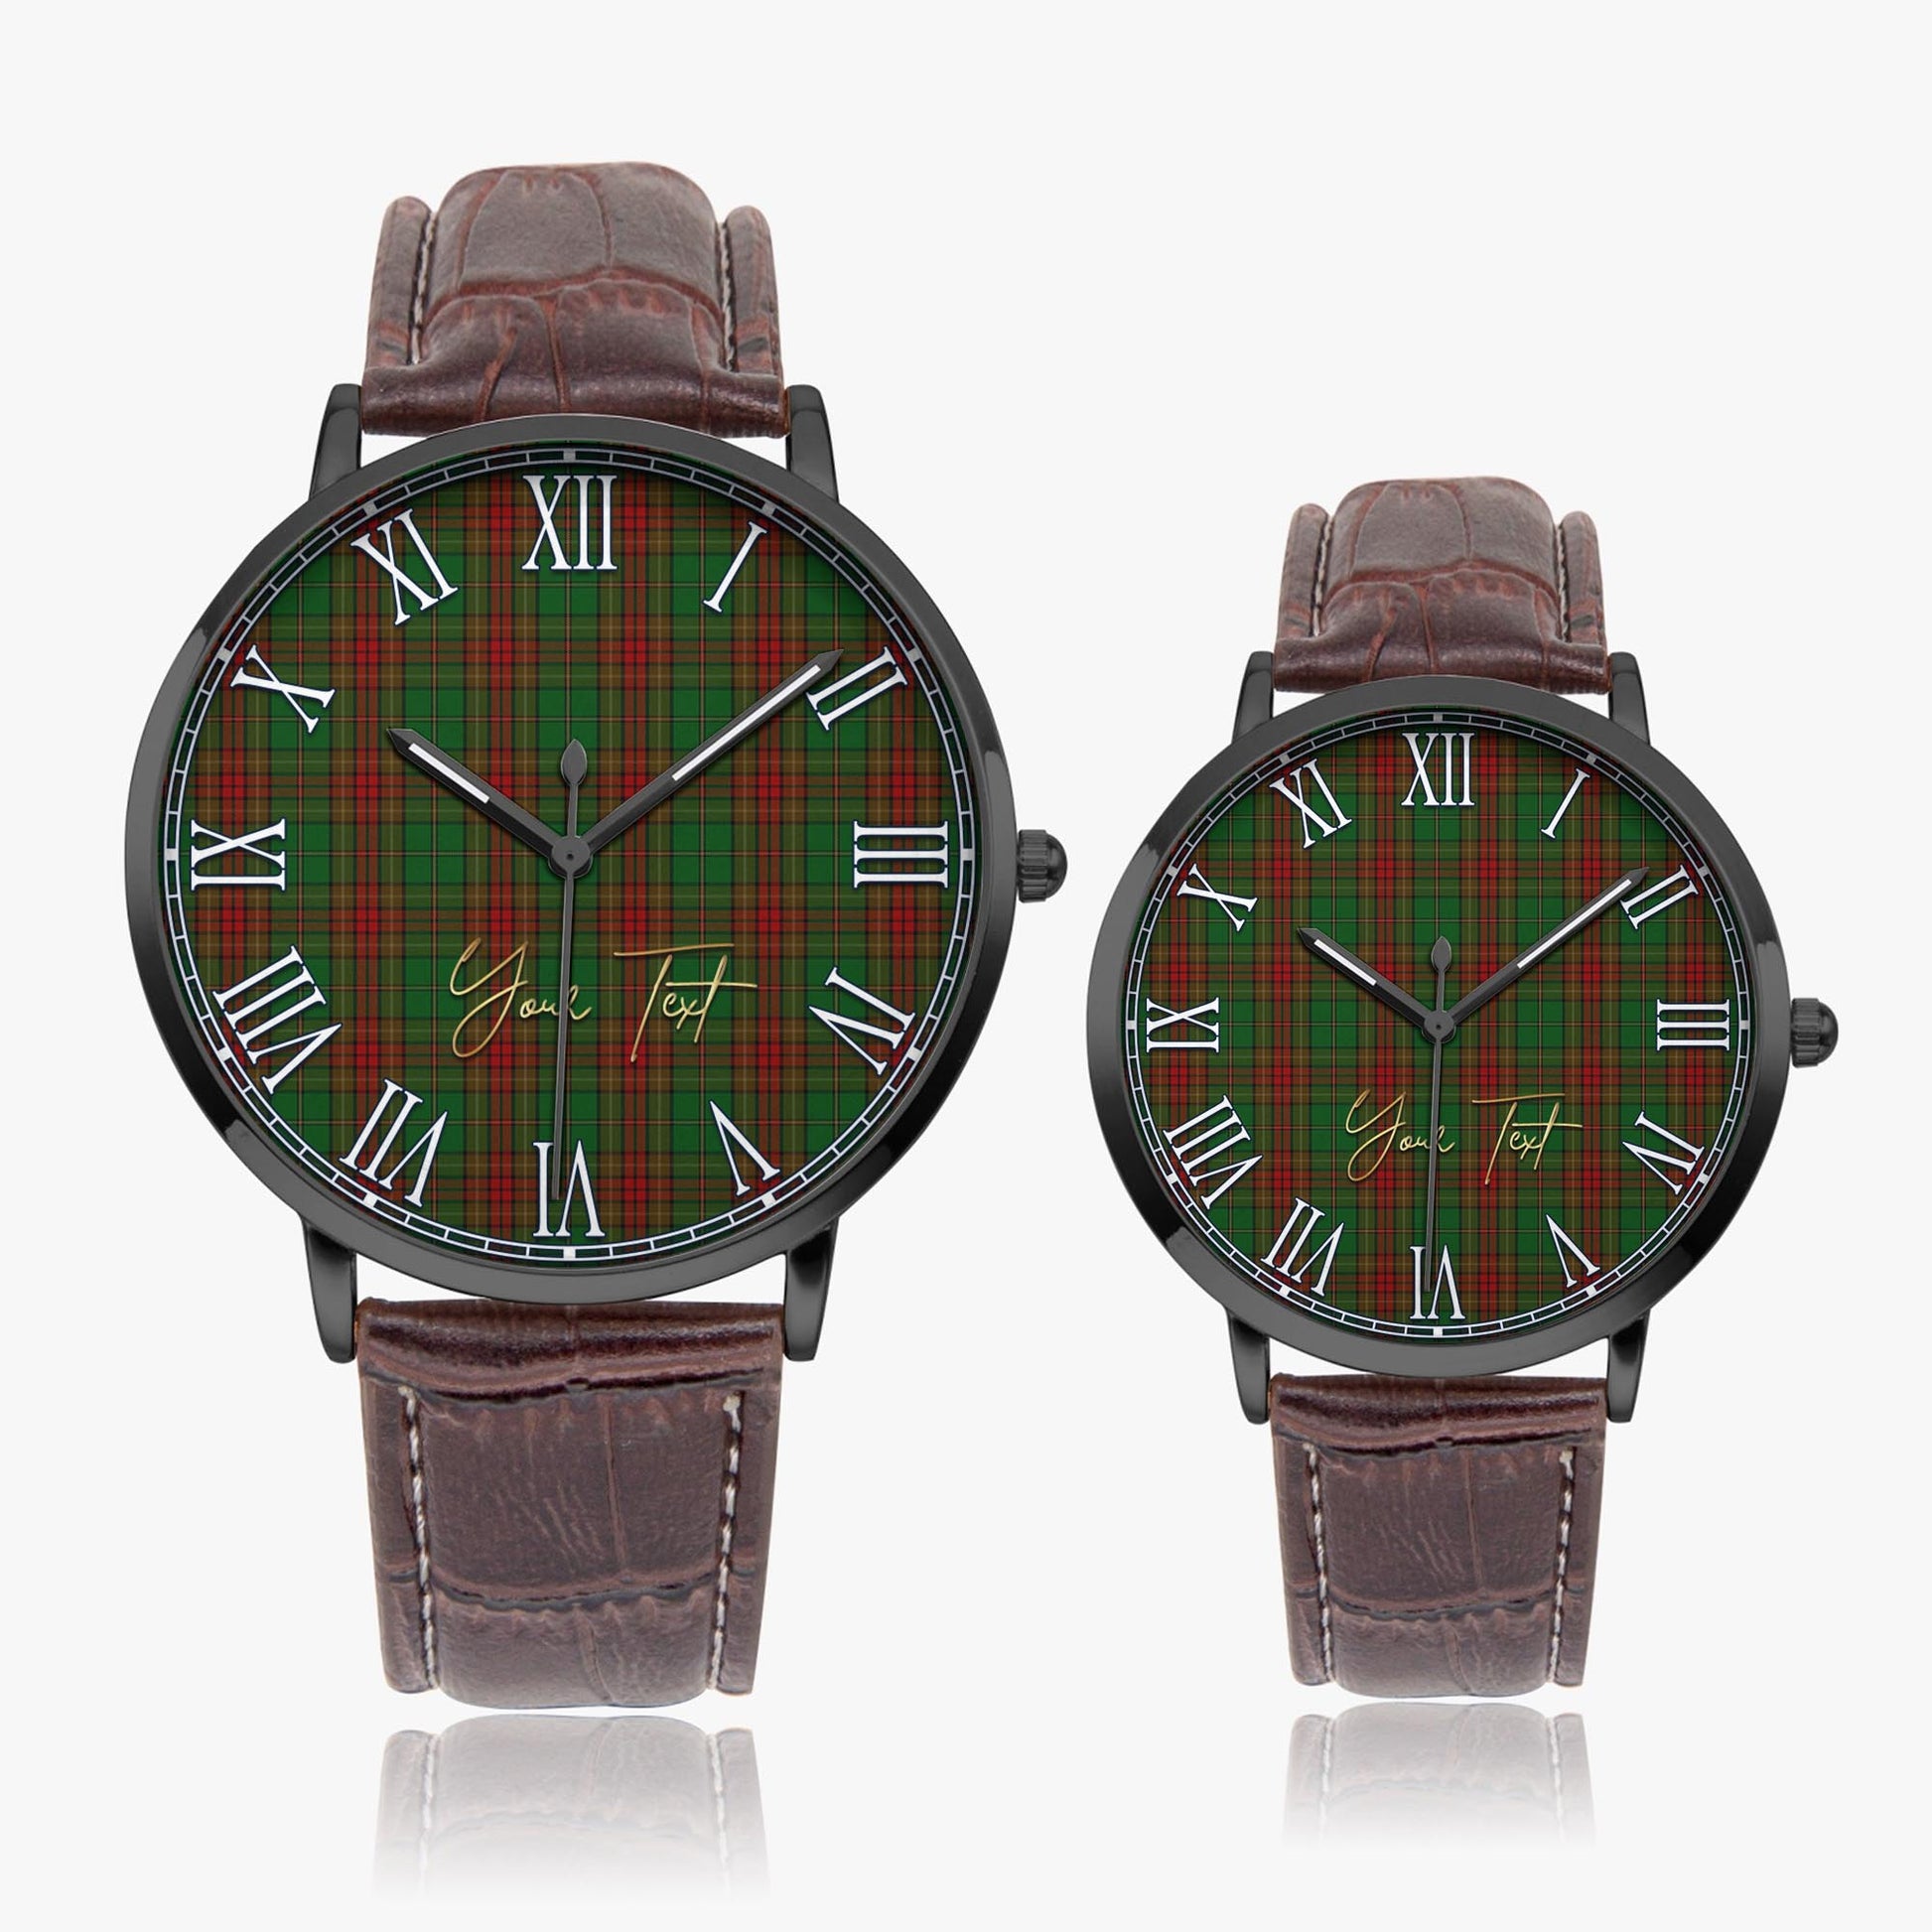 Cavan County Ireland Tartan Personalized Your Text Leather Trap Quartz Watch Ultra Thin Black Case With Brown Leather Strap - Tartanvibesclothing